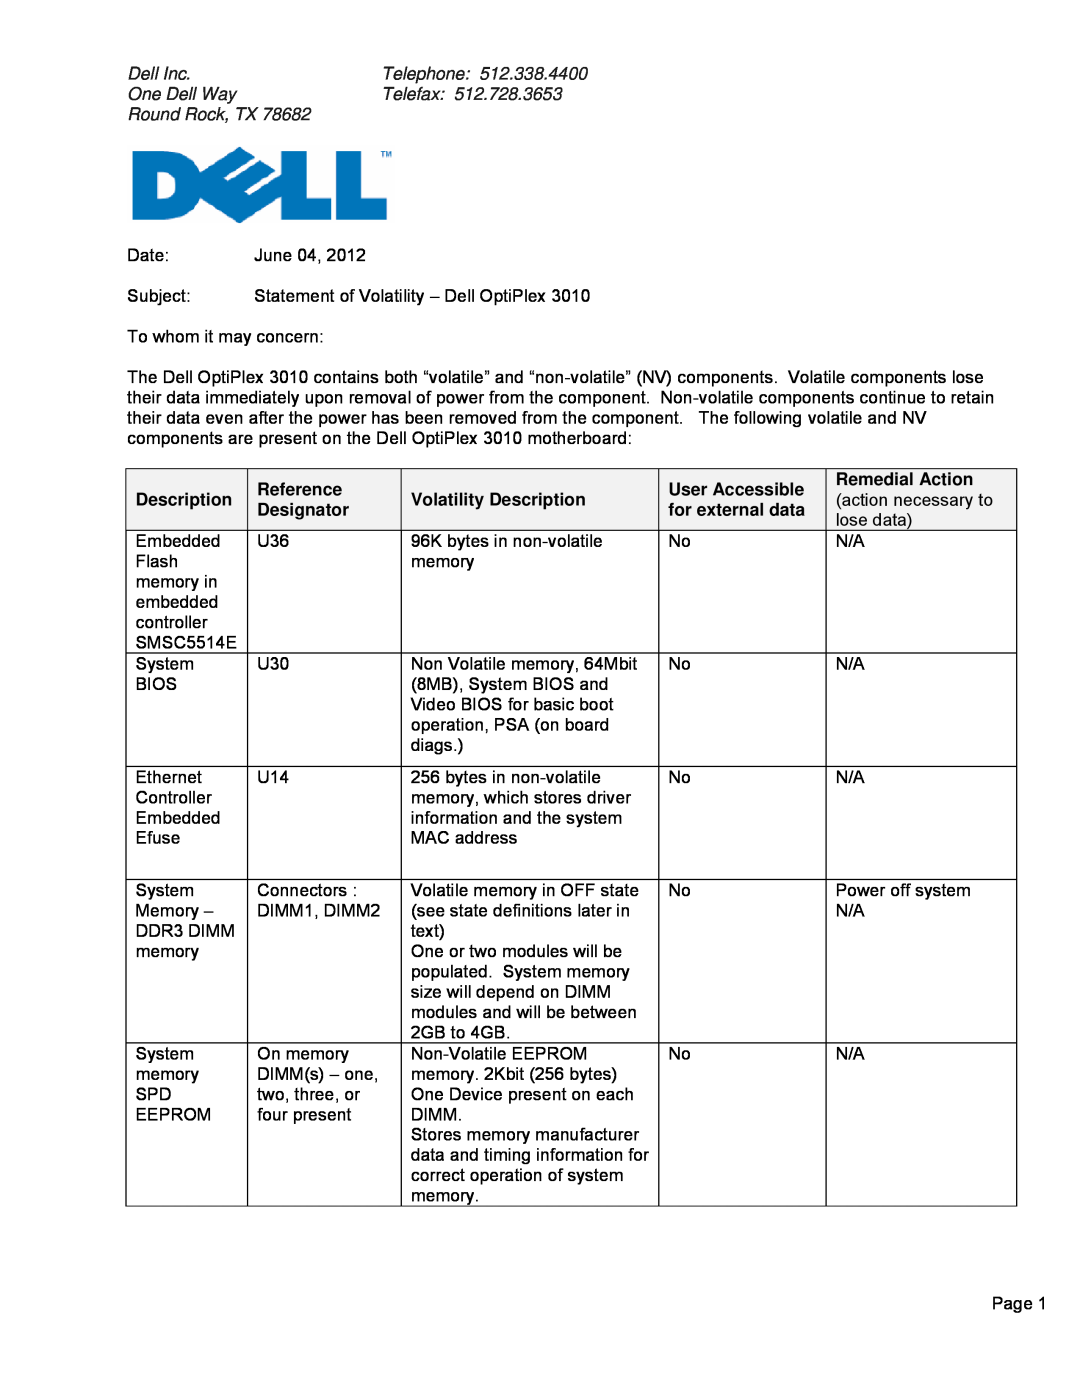 Dell 3010 manual Reference, User Accessible, Remedial Action, Volatility Description, Designator, for external data 